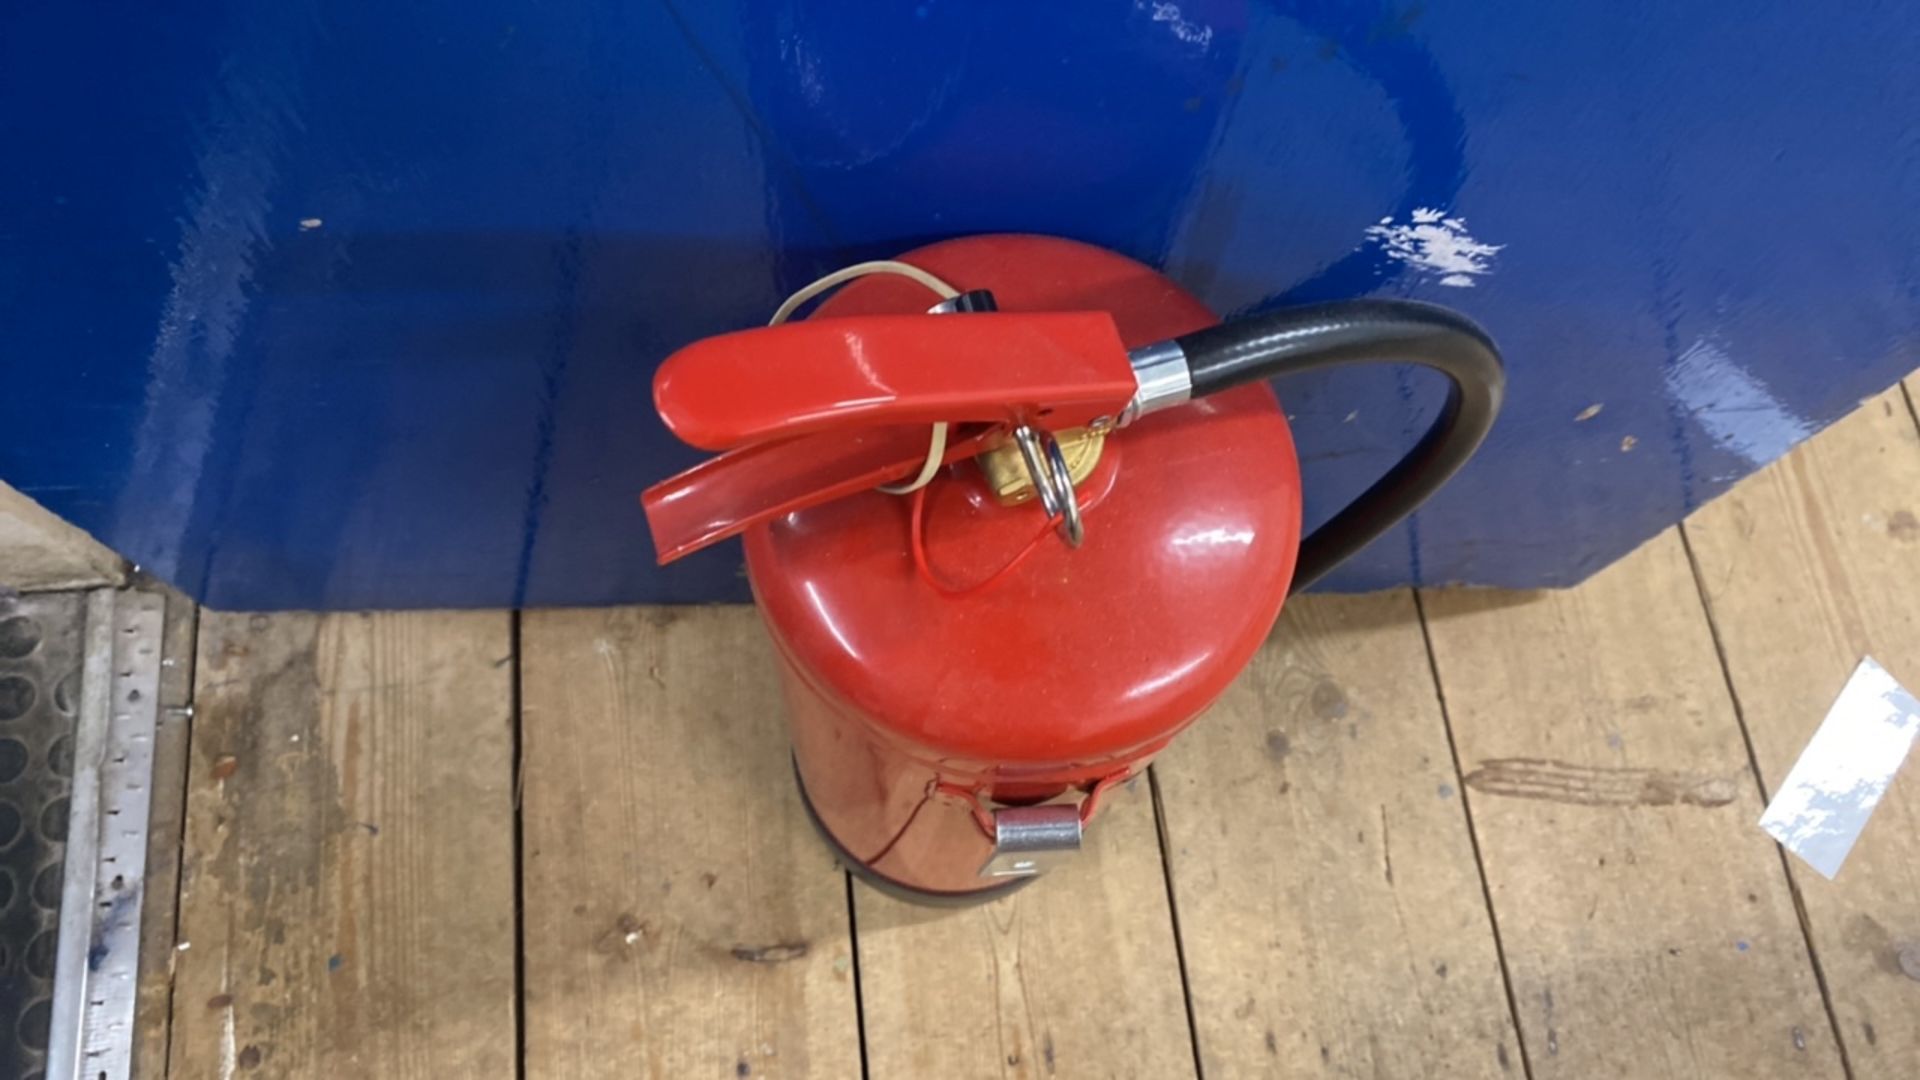 Fire Extinguisher X4 - Image 2 of 4